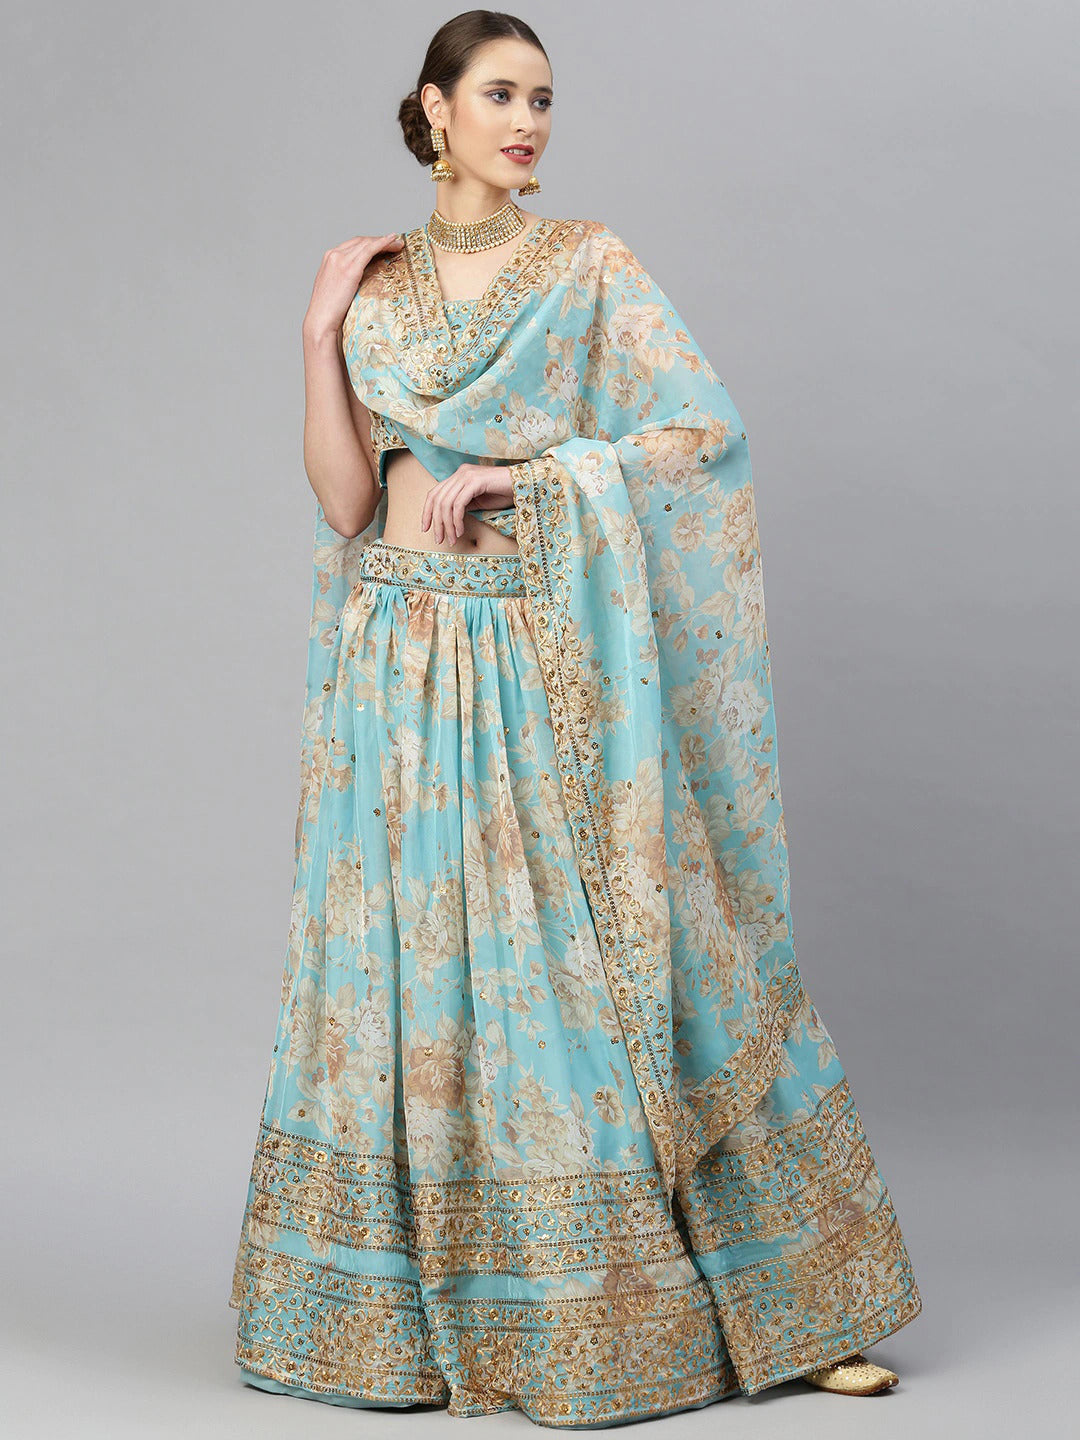 Blue Ariel Lehenga - Indian Clothing in Denver, CO, Aurora, CO, Boulder, CO, Fort Collins, CO, Colorado Springs, CO, Parker, CO, Highlands Ranch, CO, Cherry Creek, CO, Centennial, CO, and Longmont, CO. Nationwide shipping USA - India Fashion X